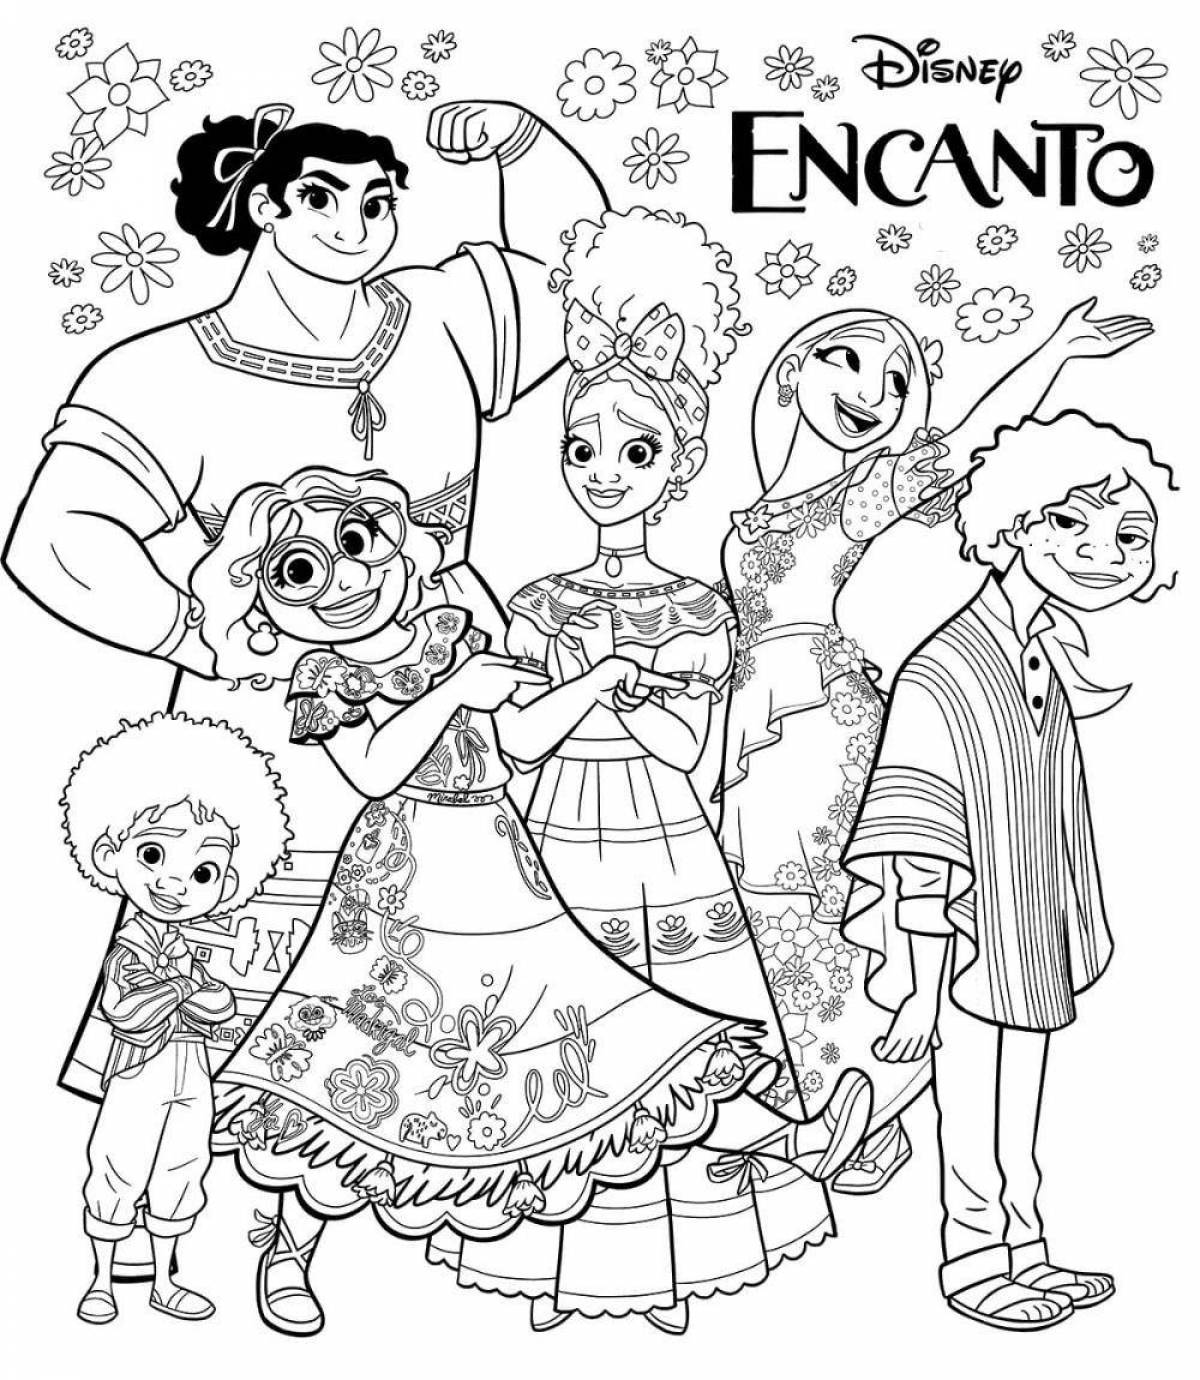 Fantastic mrs coloring page